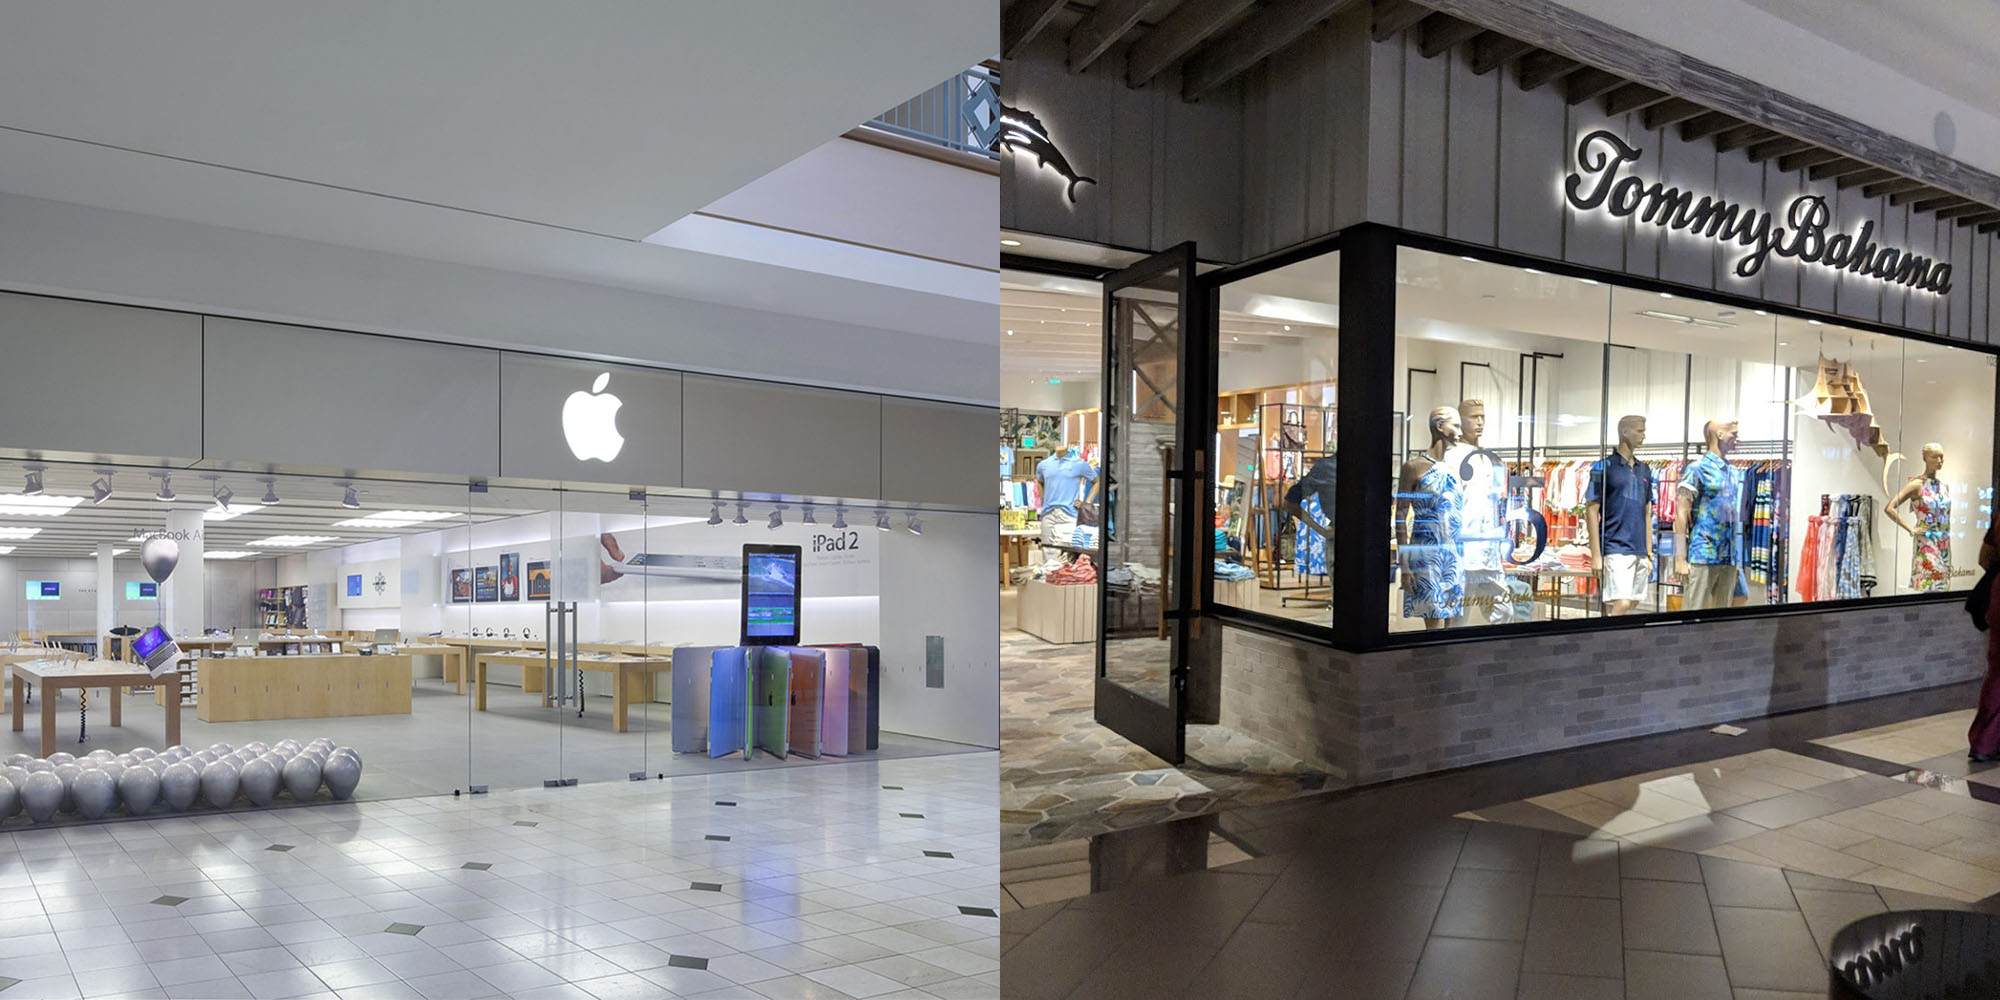 Apple's former retail stores: Where are 